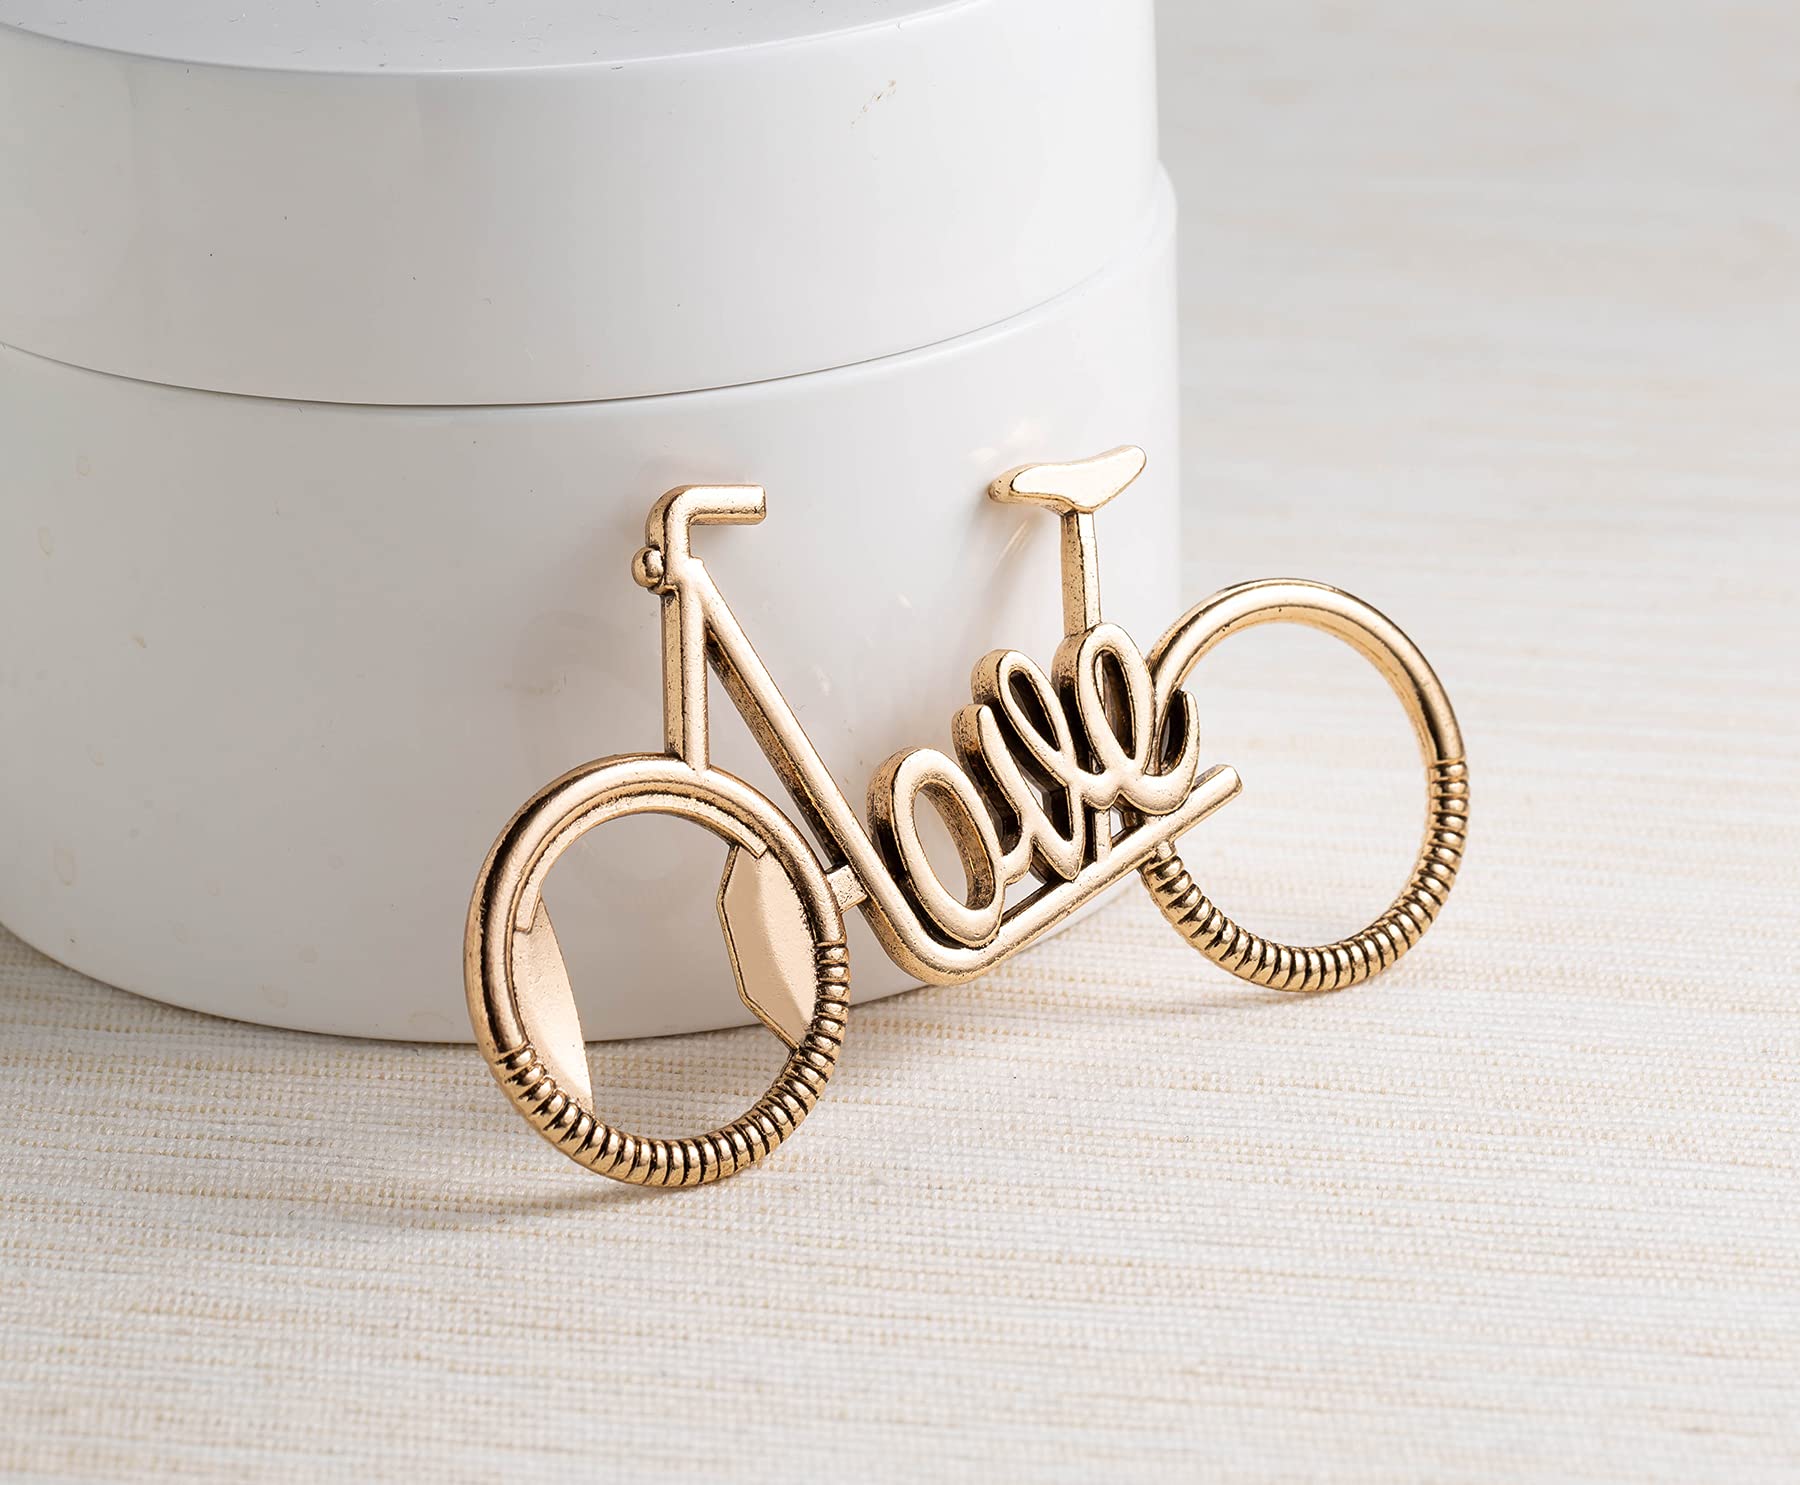 24 PCS Love Design Golden Bicycle Shape Bottle Openers for Wedding Favors Bridal Shower Gifts ，Decorations and Souvenirs for Guests (24, golden love bicycle)